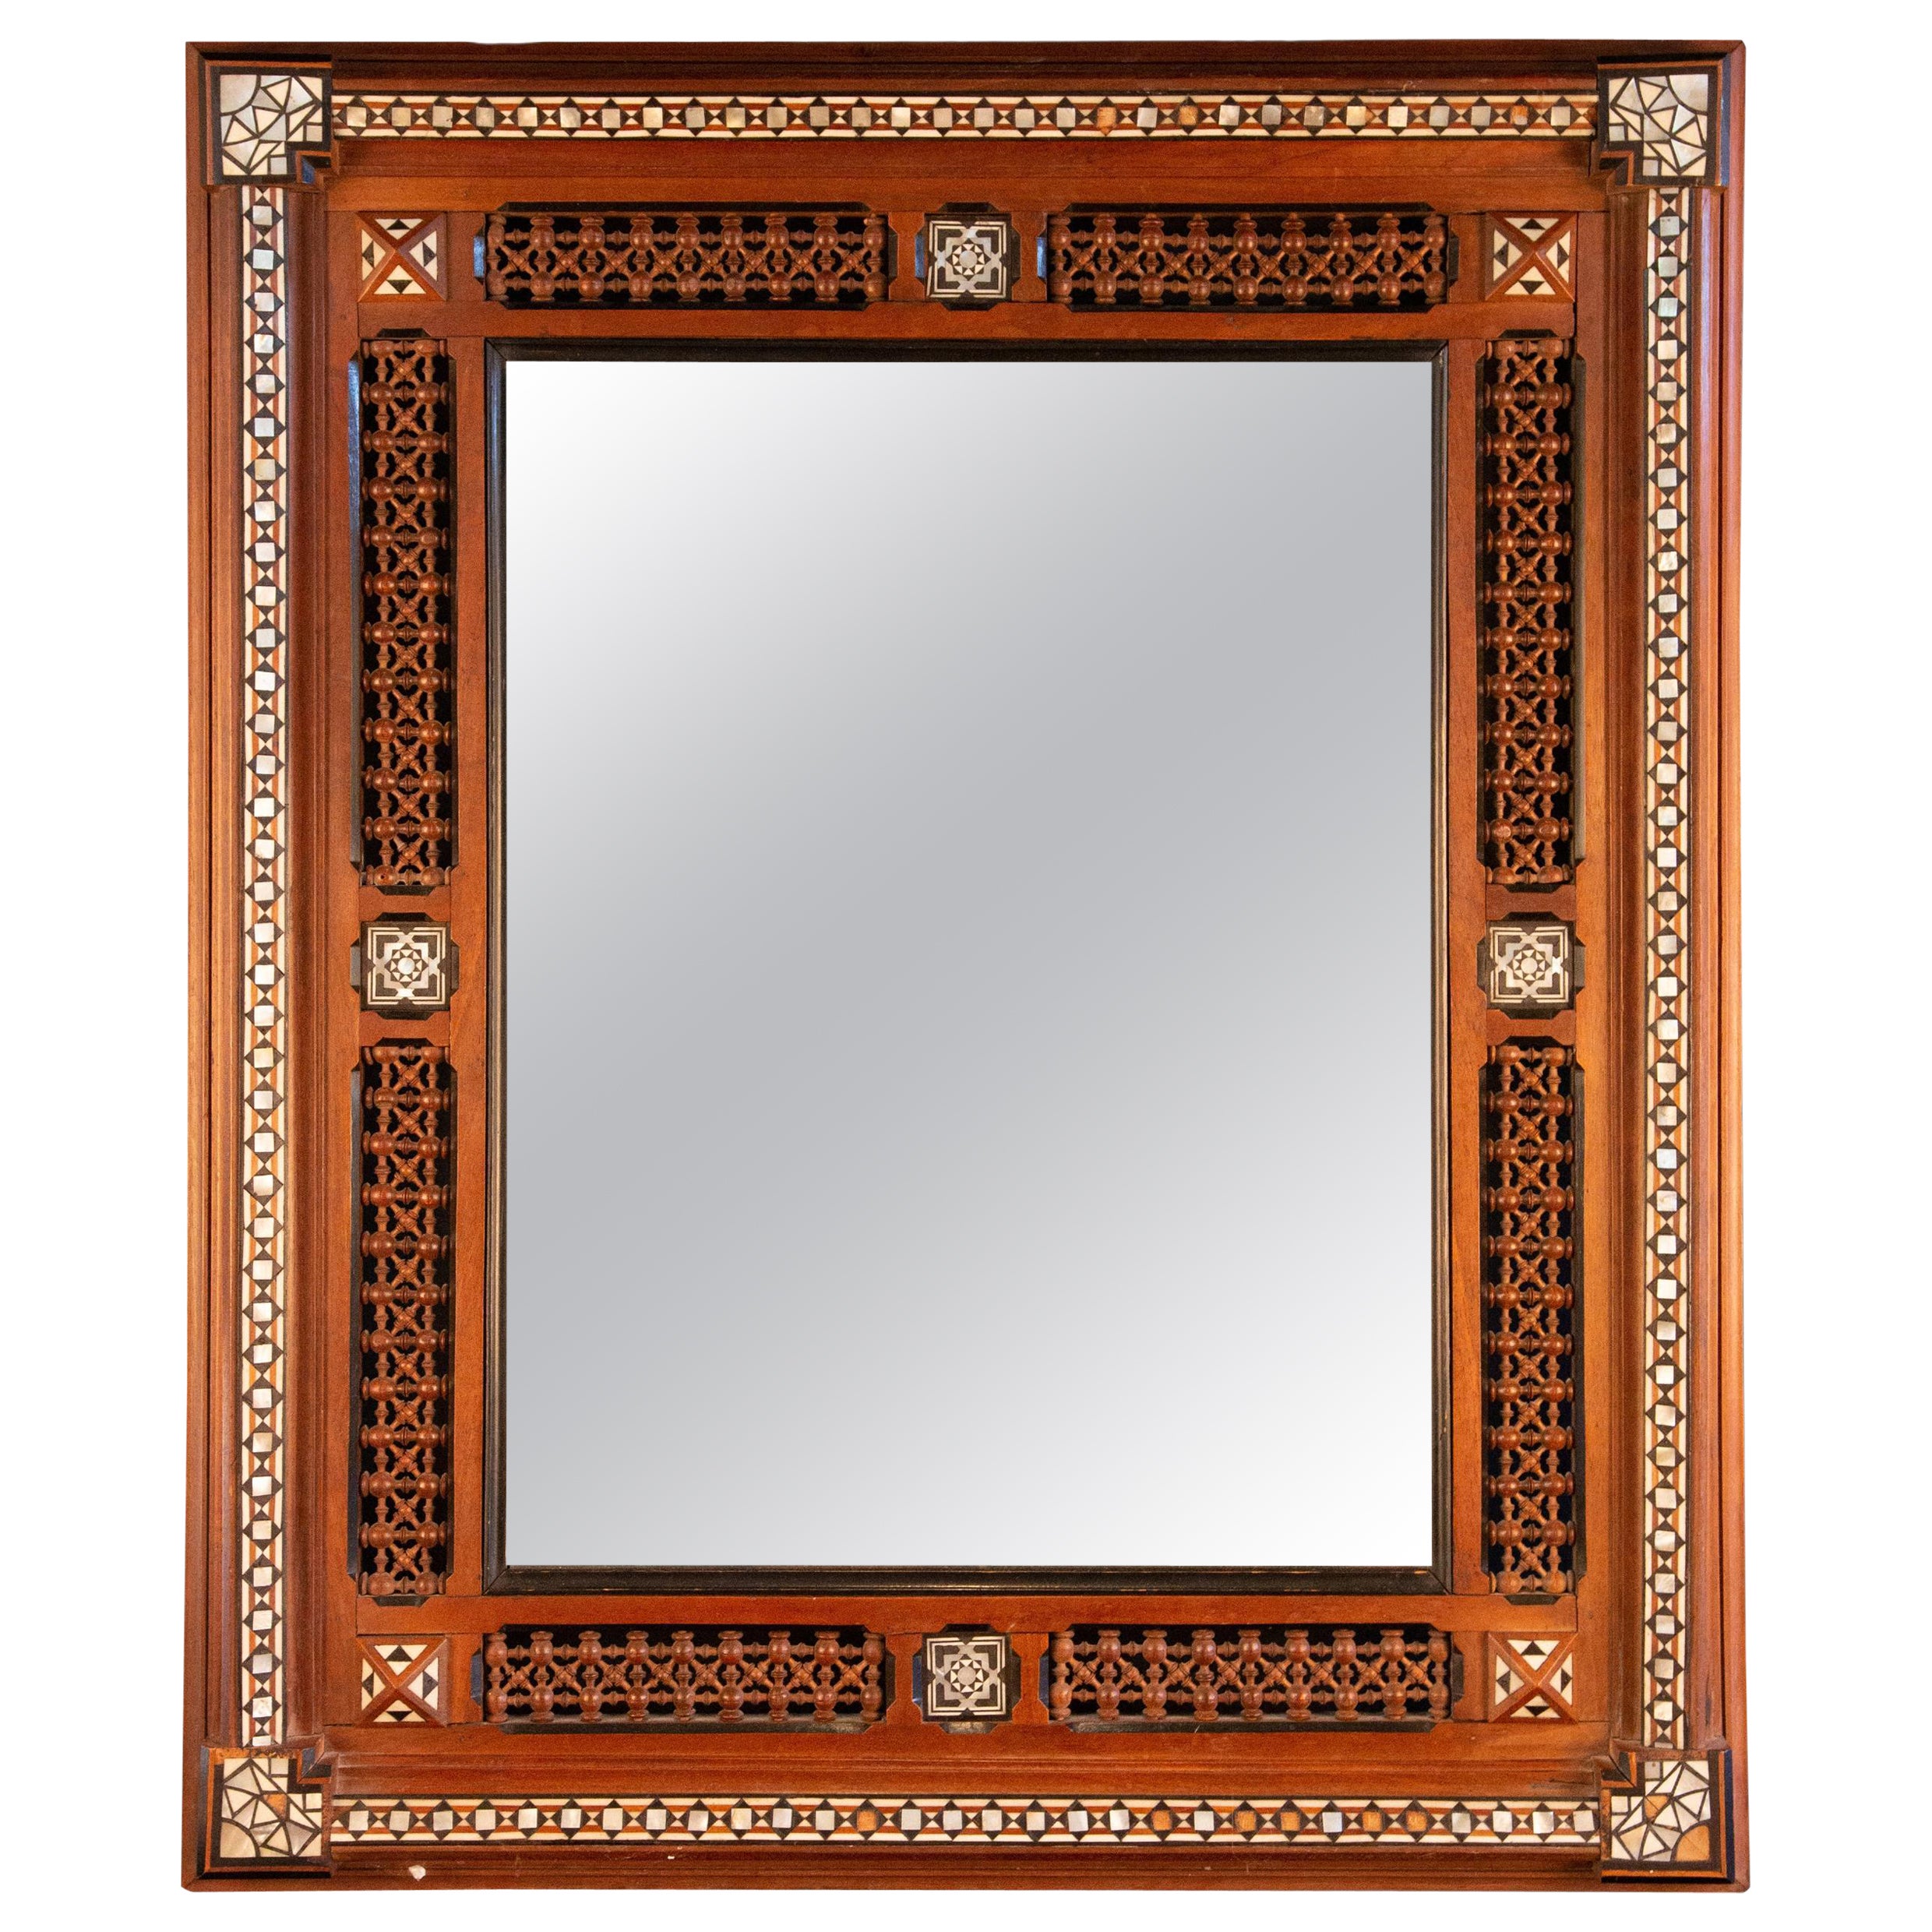 Early 20th Century Damascus Inlaid Bone and Wood Wall Mirror For Sale